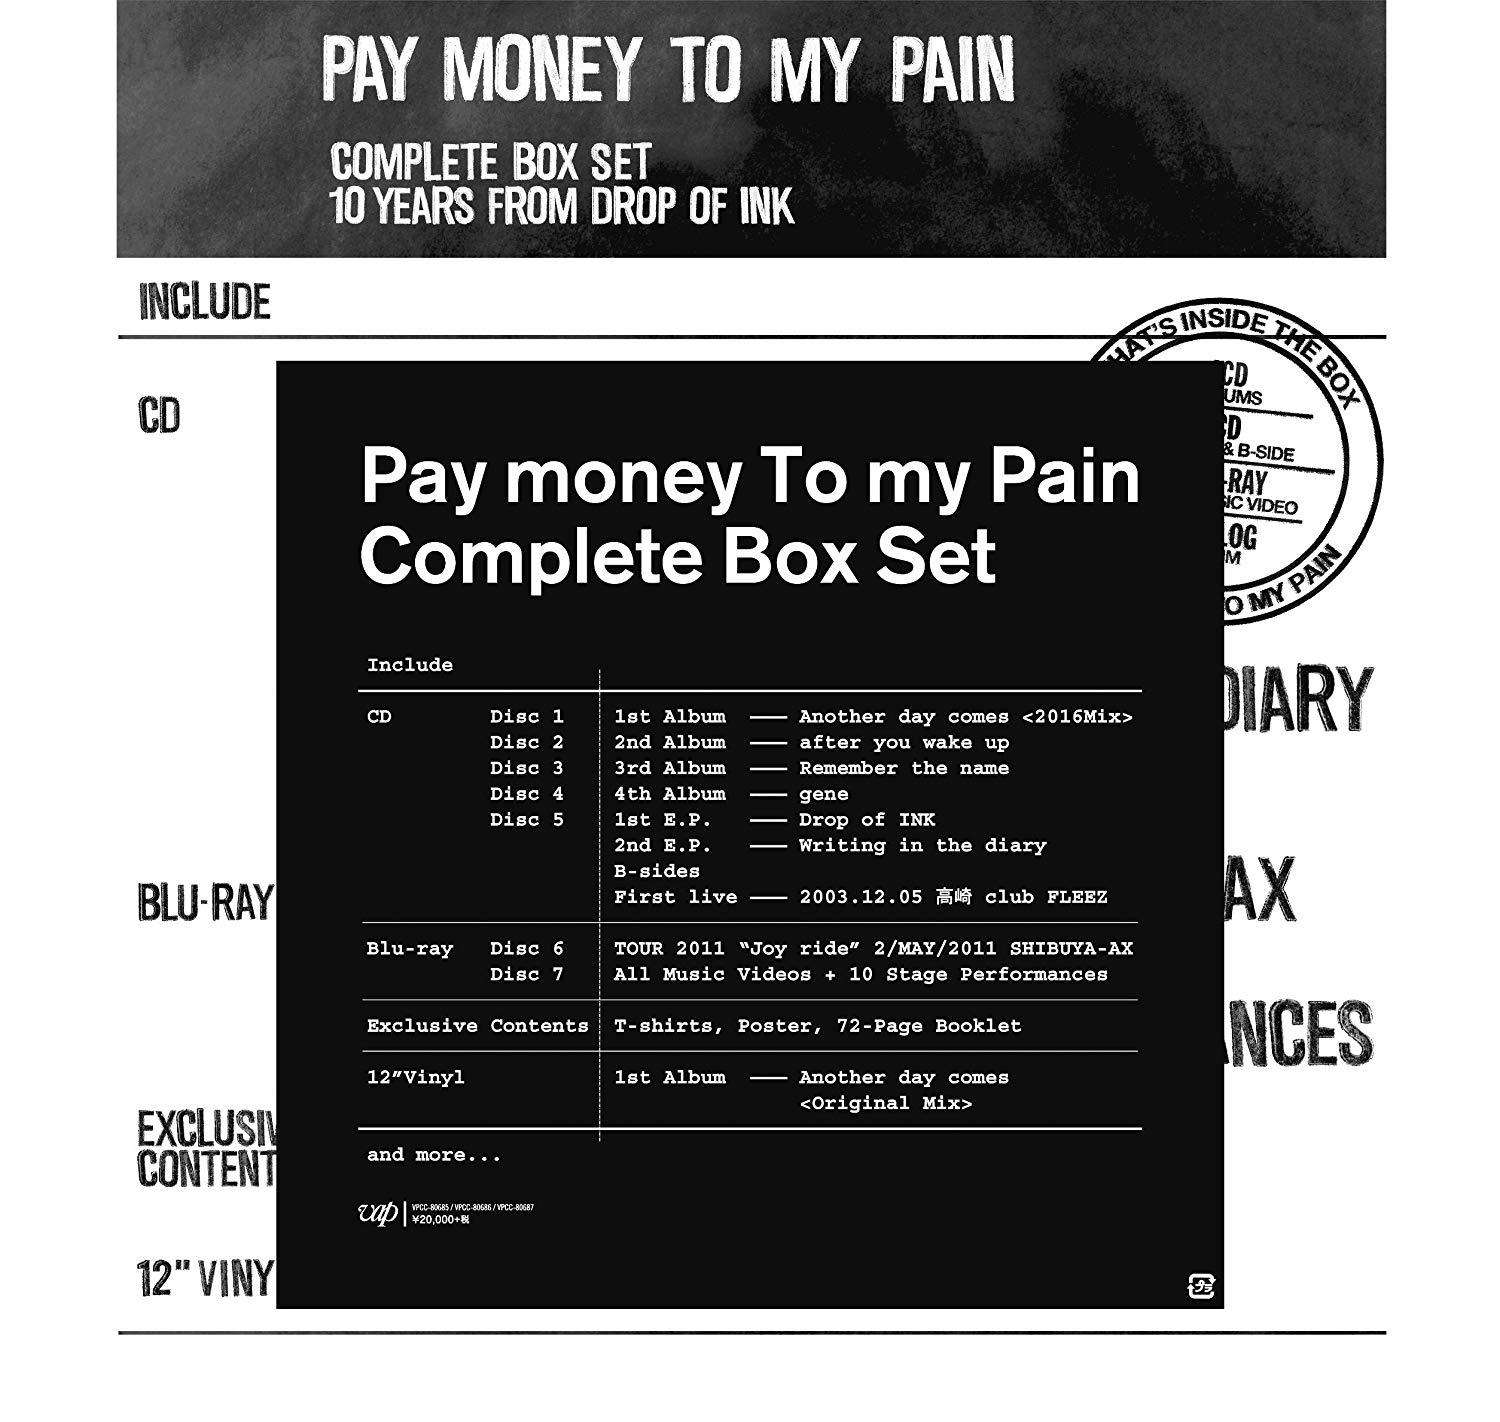  Pay money To my Pain -L-(Y) Pay money To my Pain